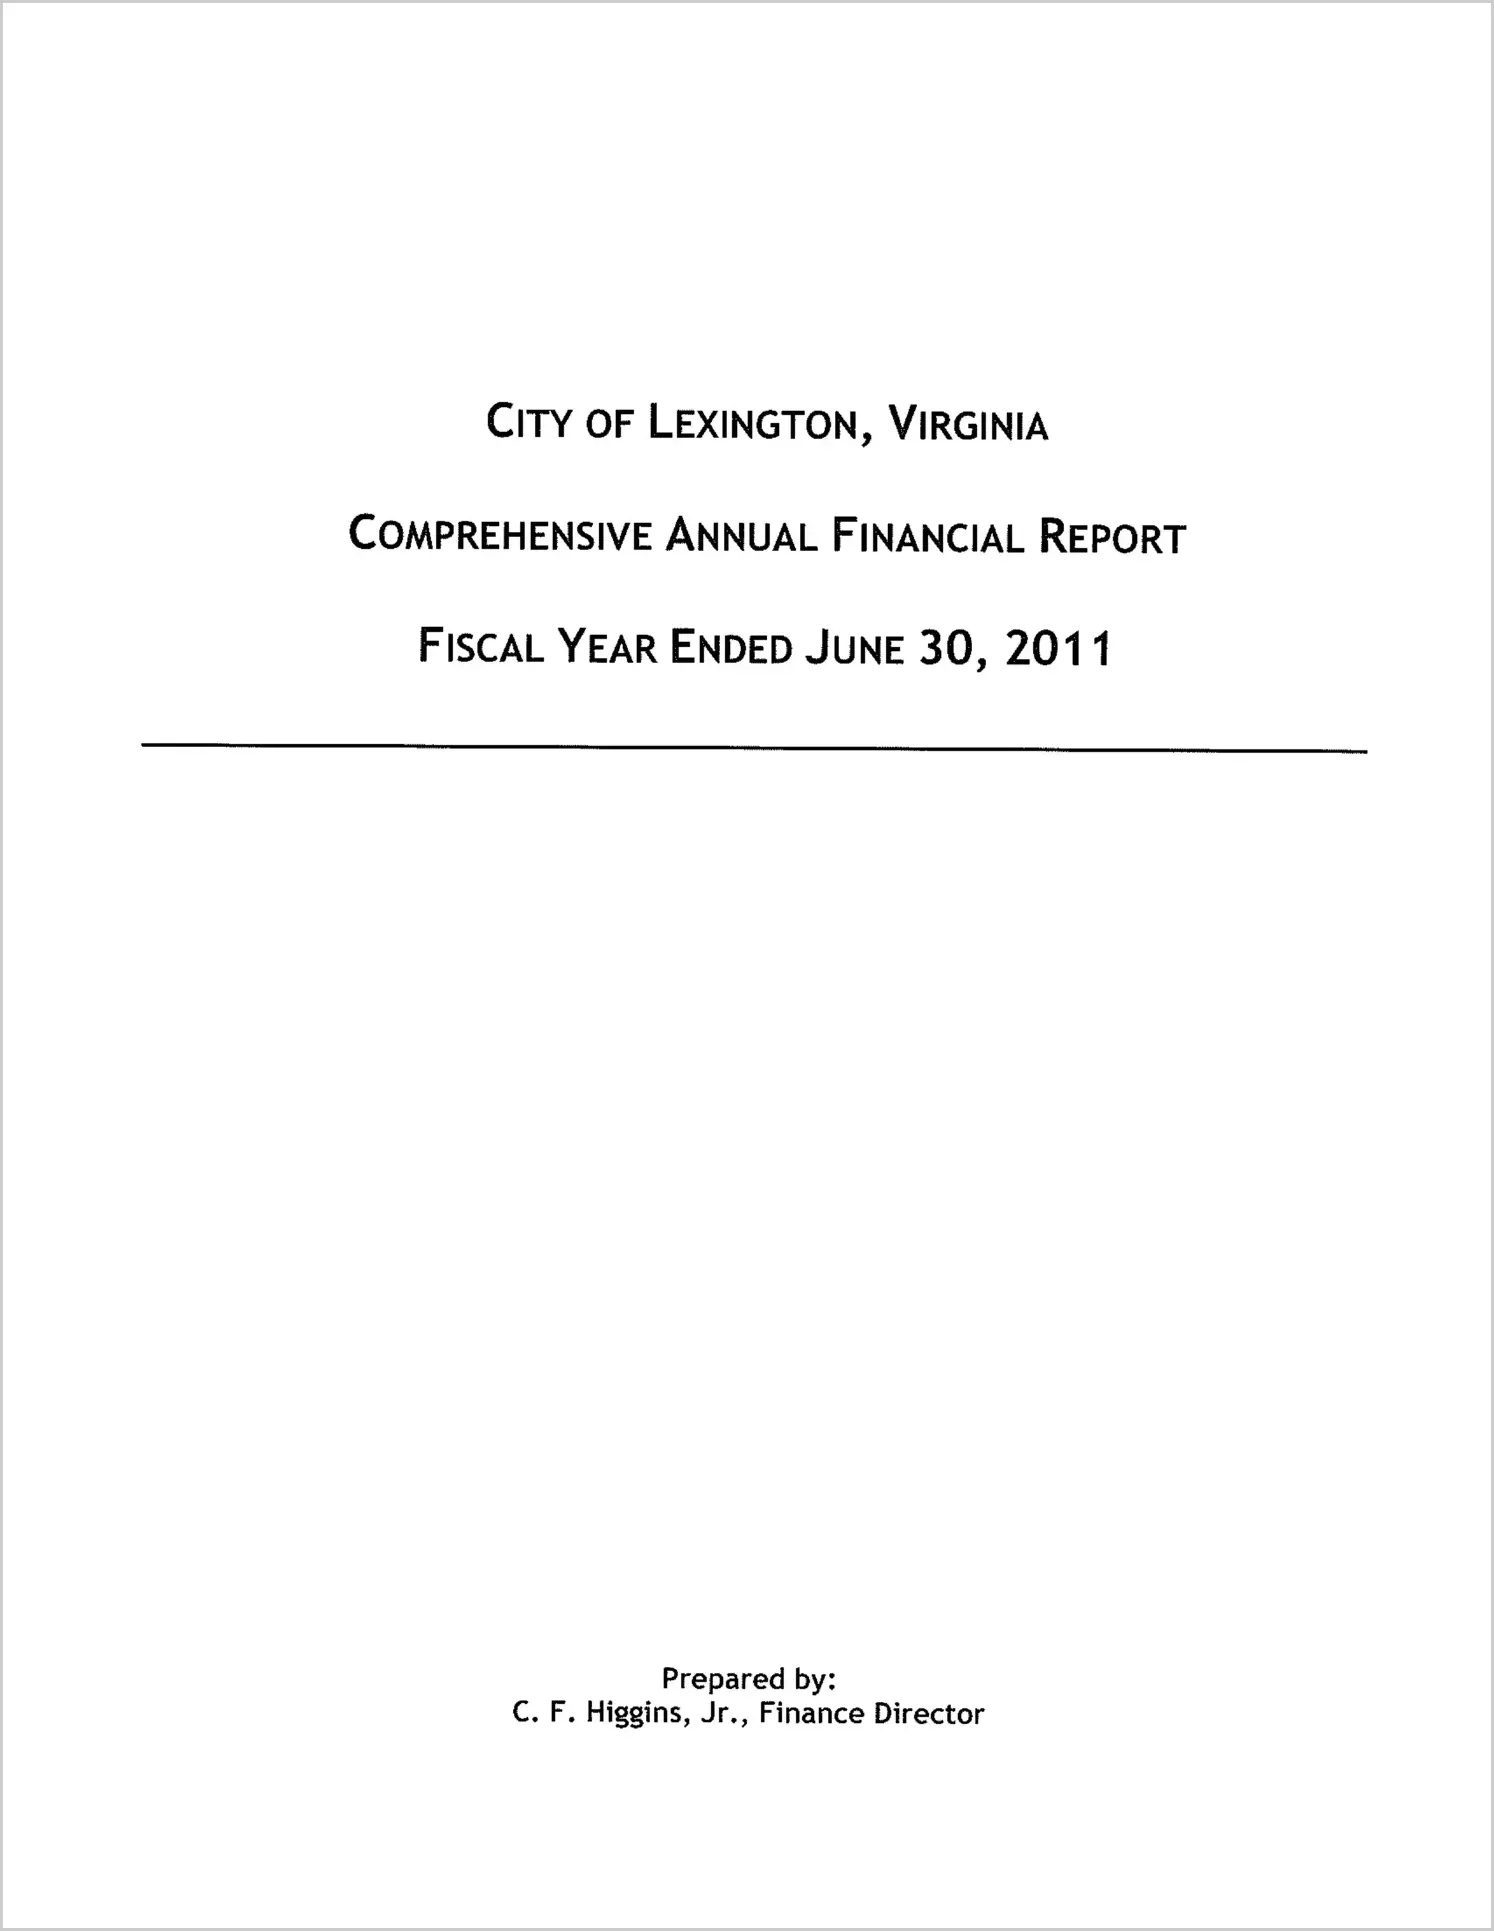 2011 Annual Financial Report for City of Lexington